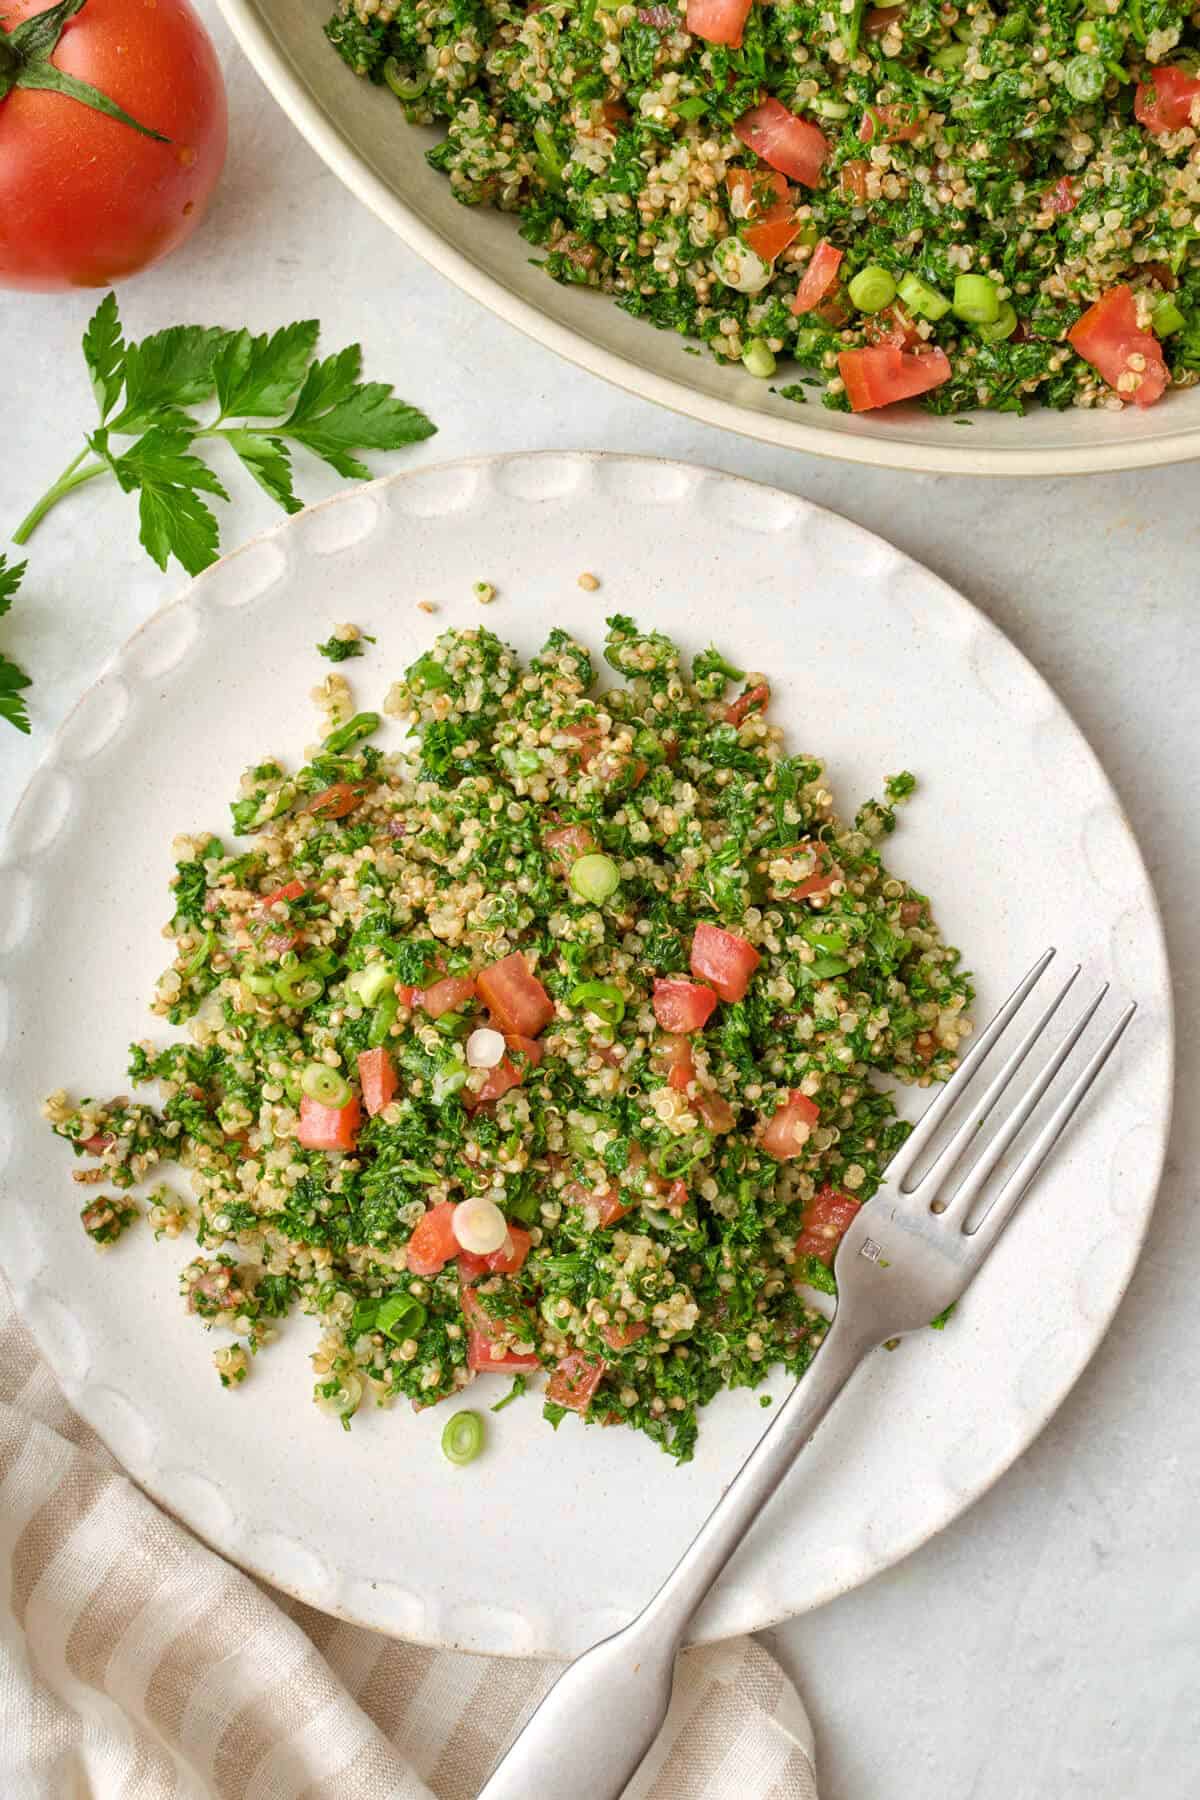 Plate of the of final quinoa tabbouleh recipe garnished with green onions.